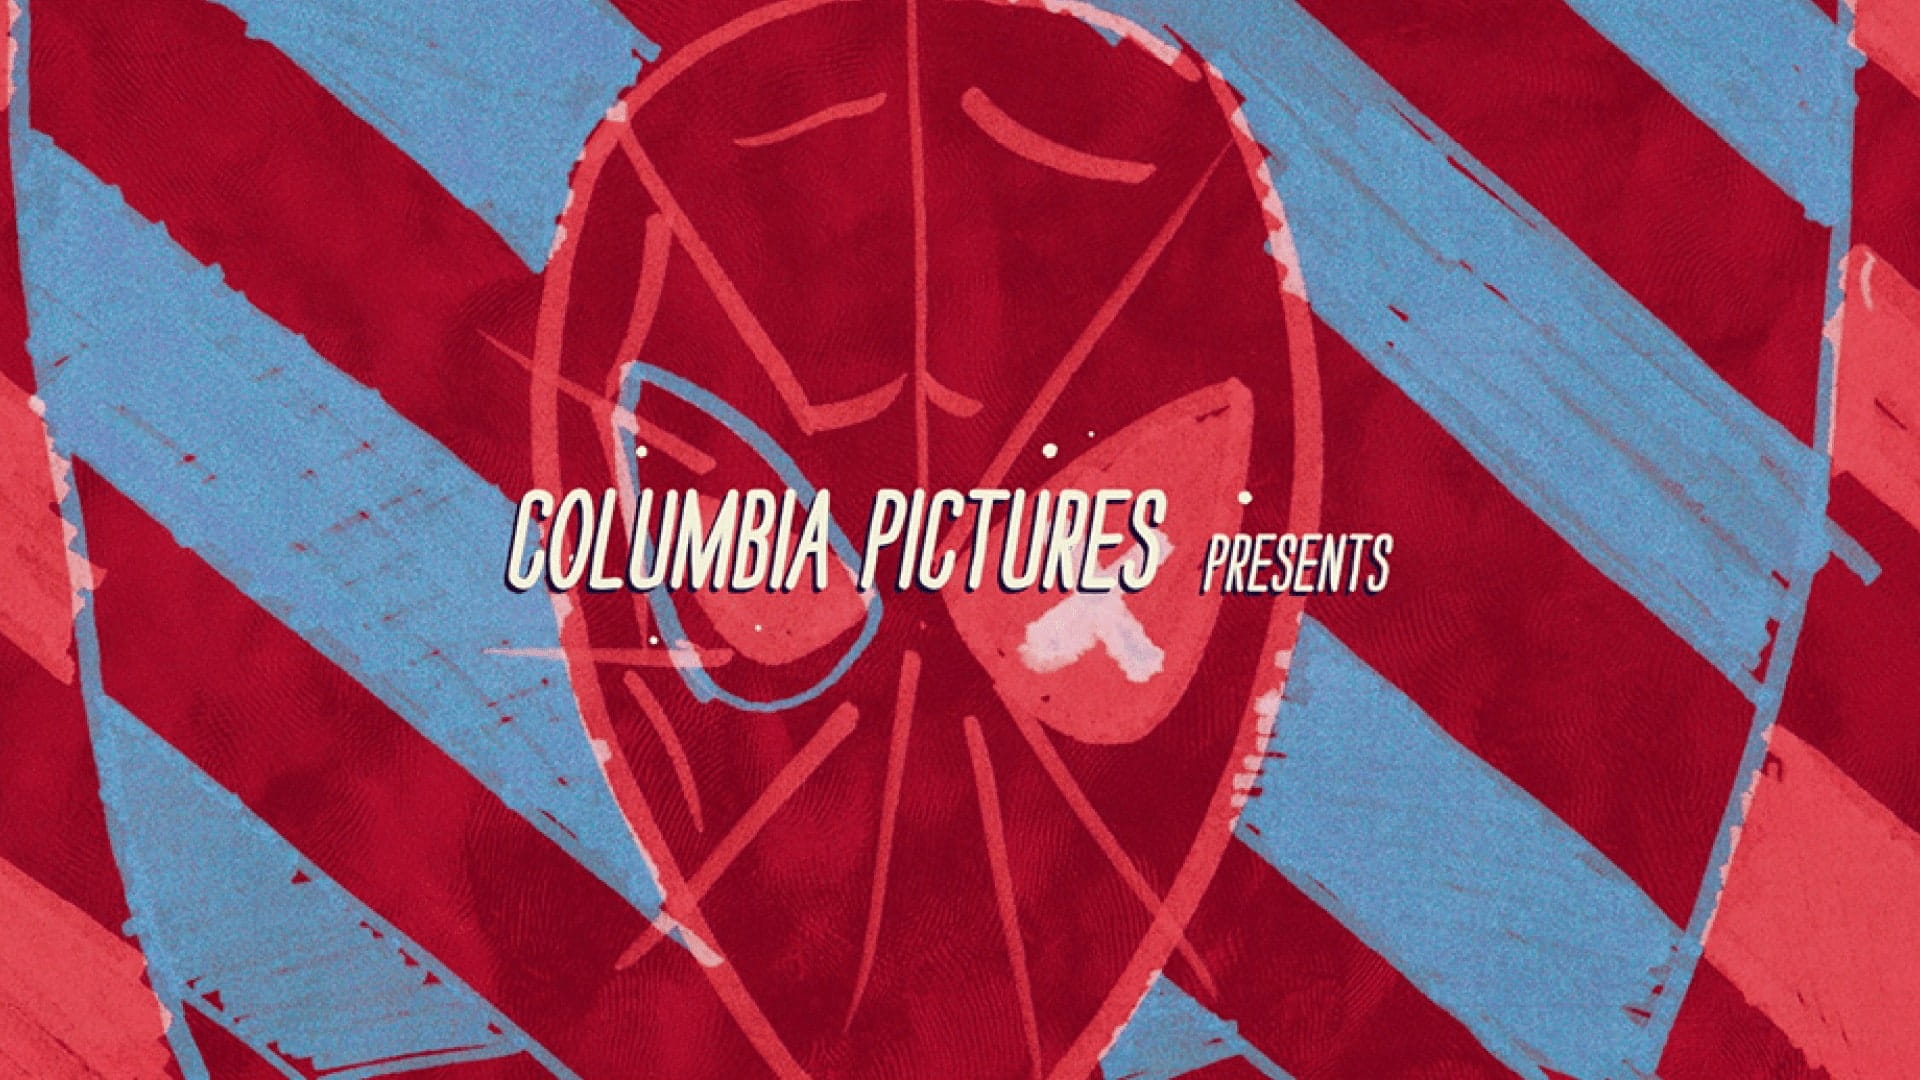 Spider-Man: Homecoming Title Design | PERCEPTION